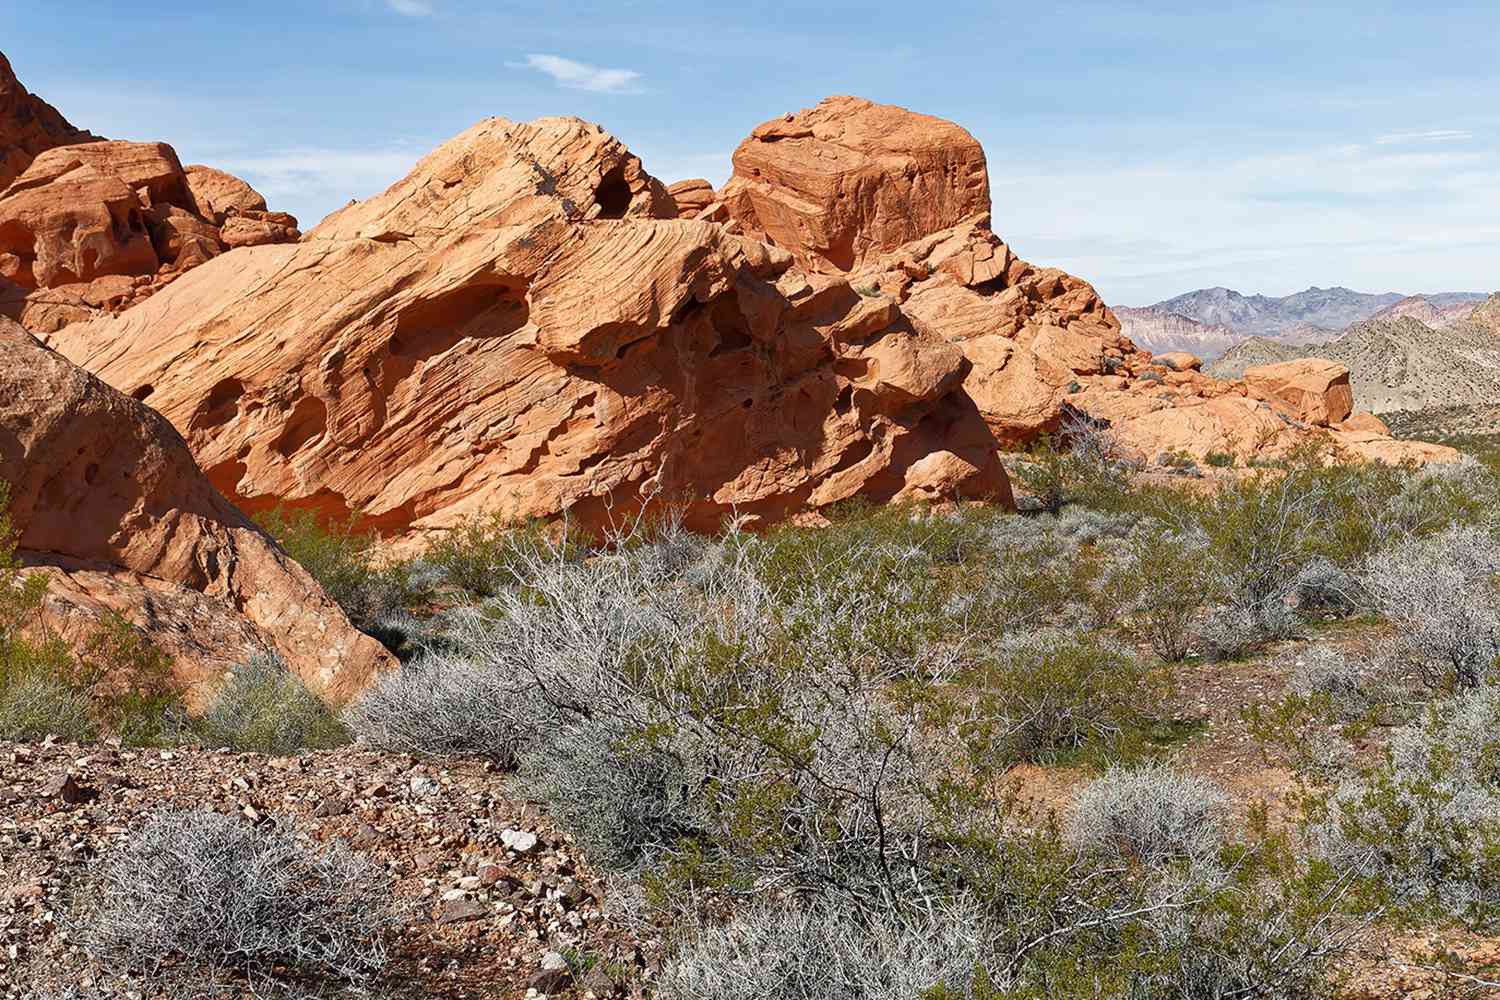 Visitors Accused of Vandalizing Ancient Rock Formations at Lake Mead [Video]